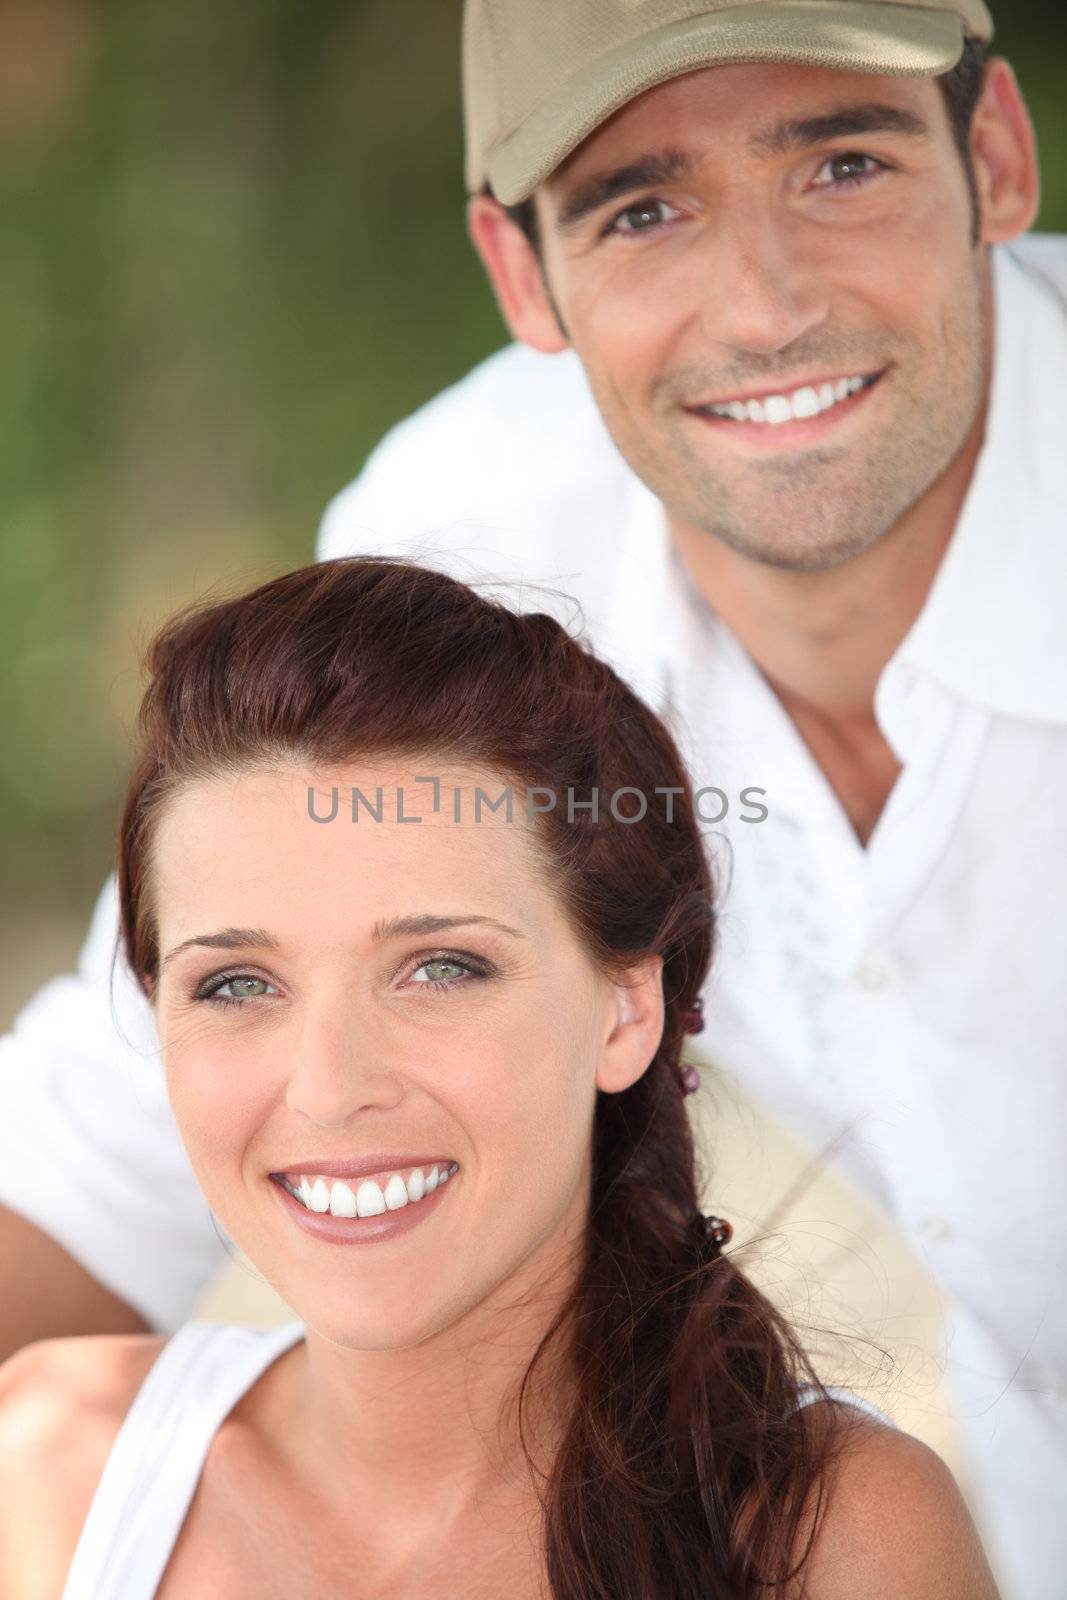 Smiling couple outdoors by phovoir